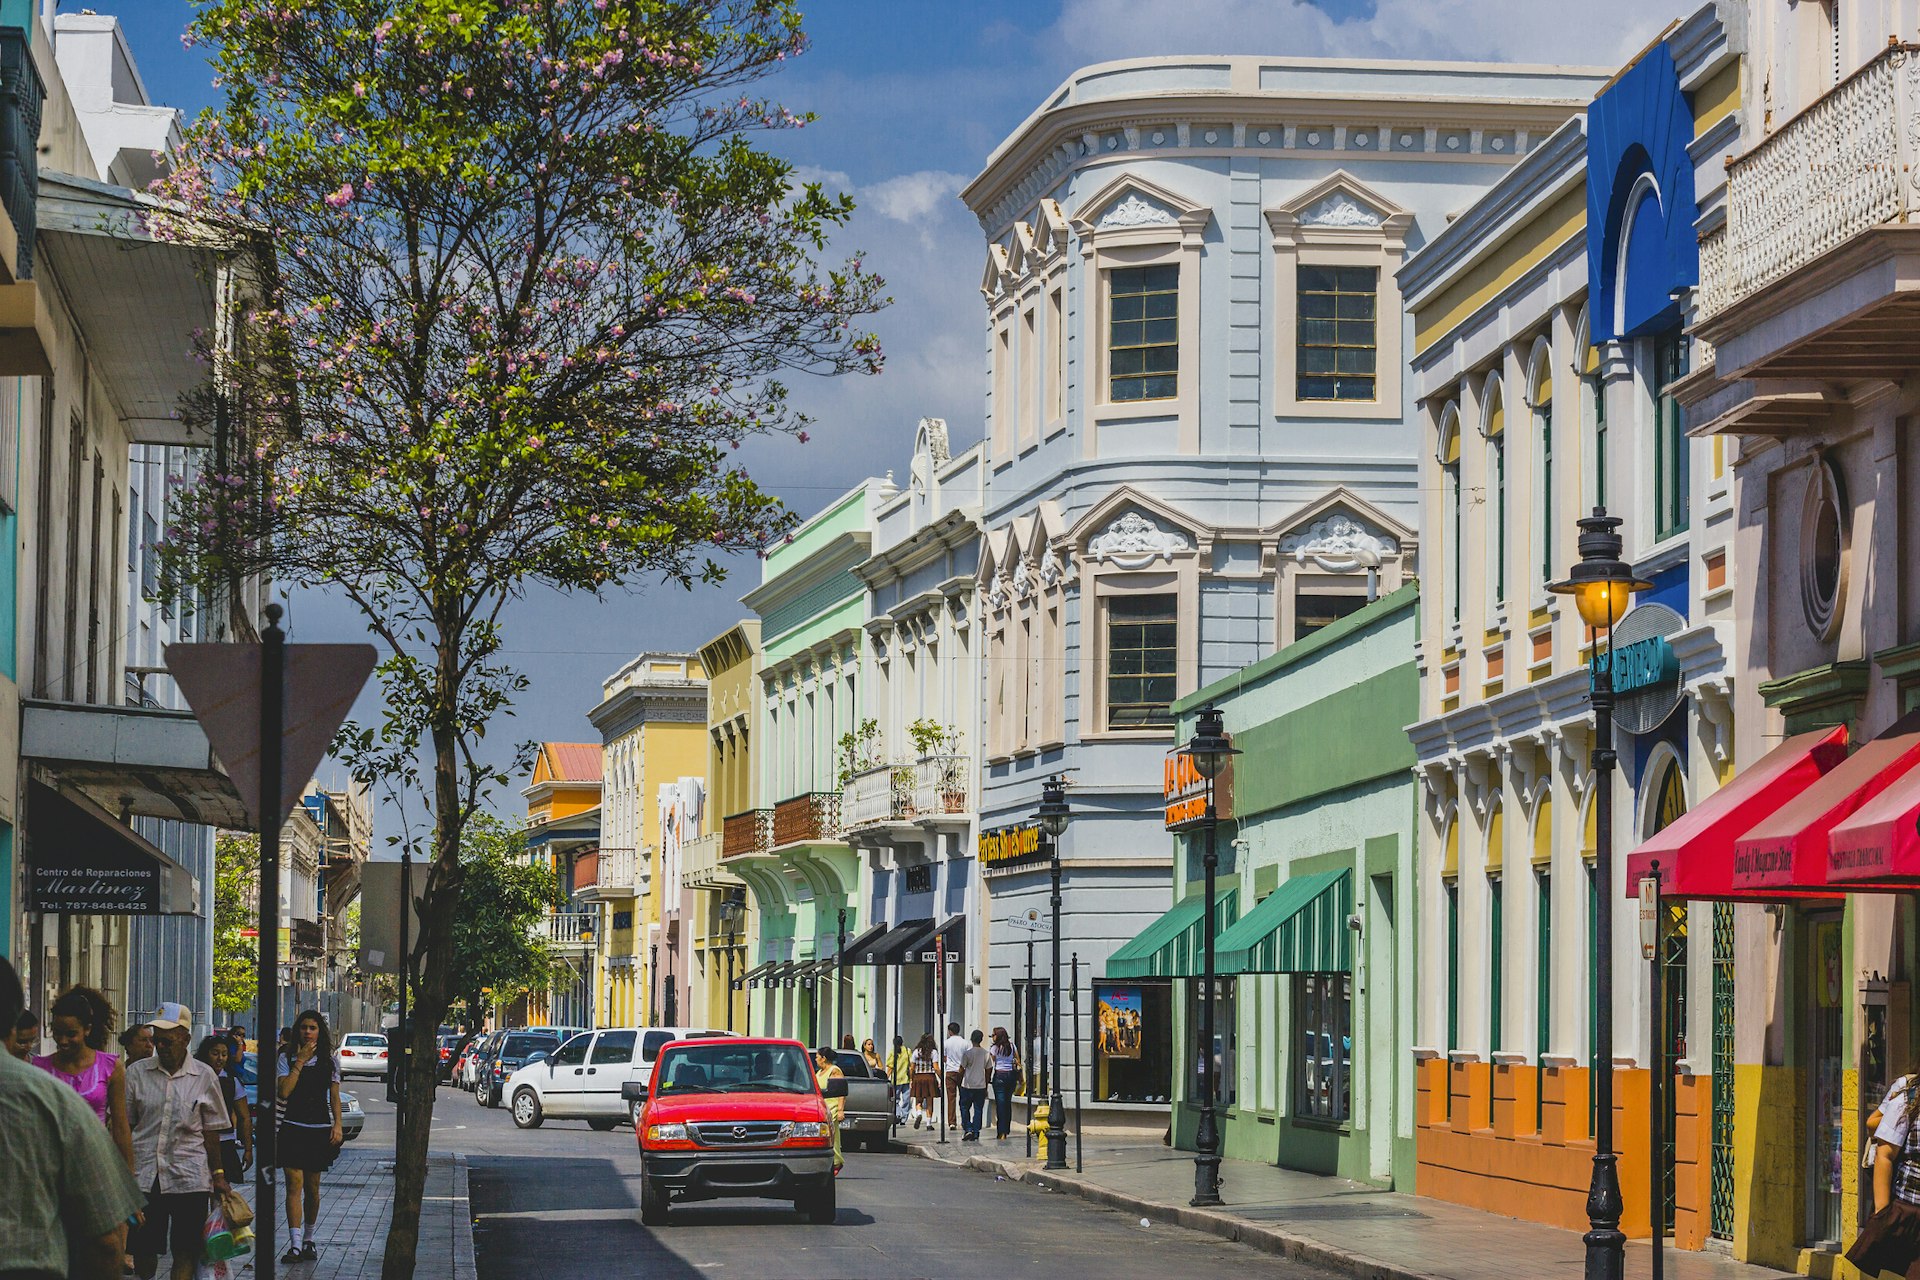 A red car drives down a street lined with pastel-colored buildings in the city of Ponce, Puerto Rico